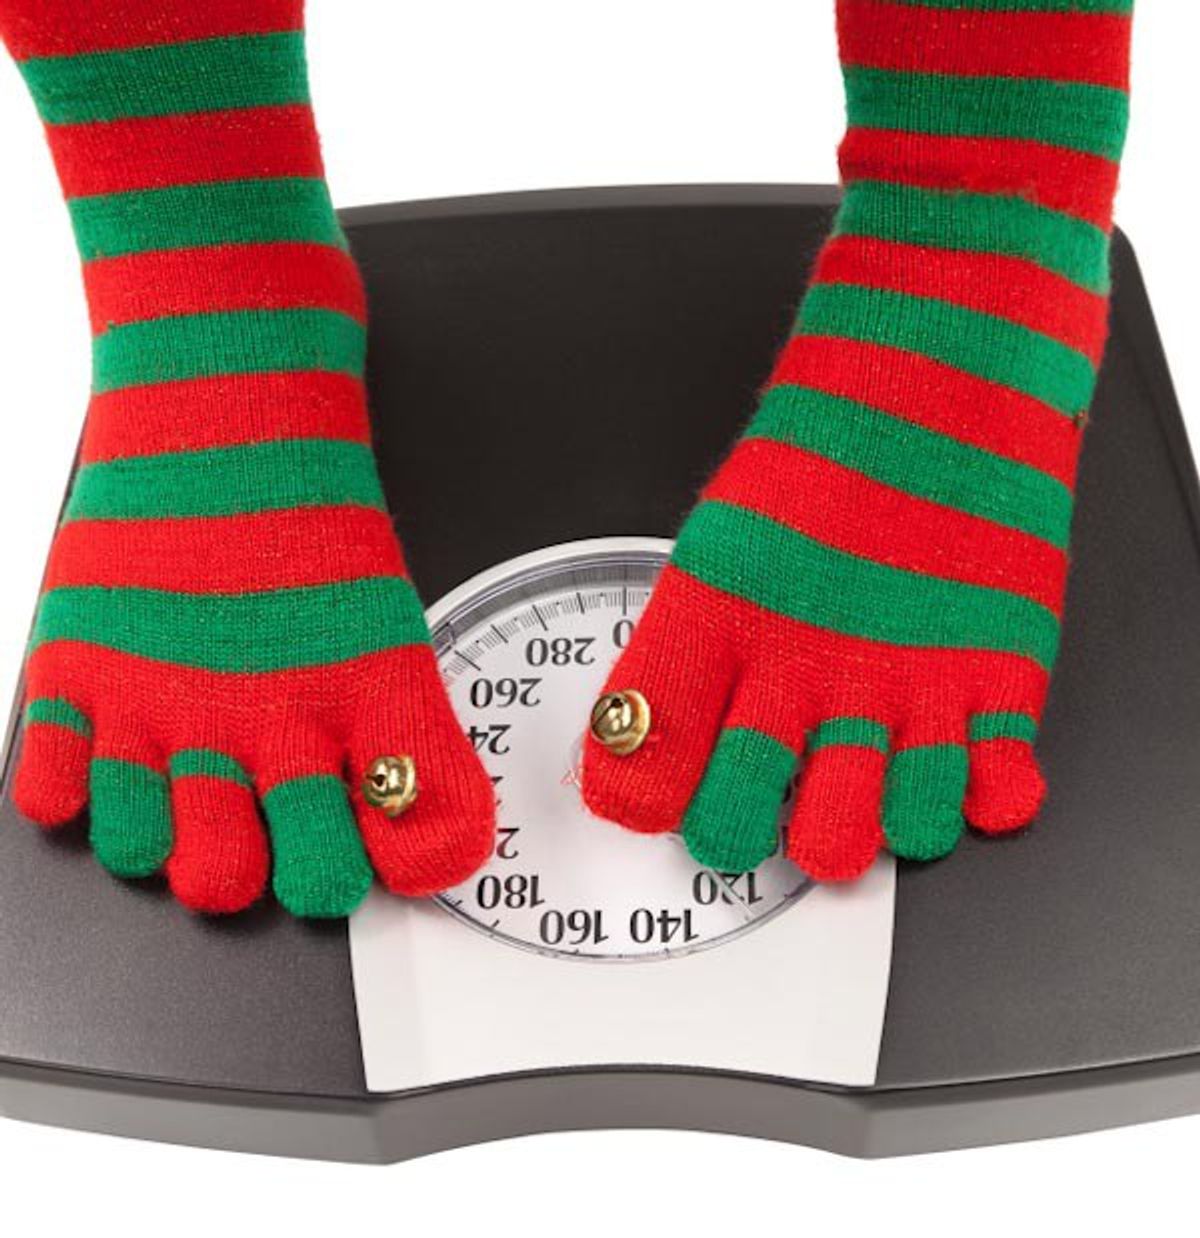 4 Apps to Help Lose the Holiday Weight